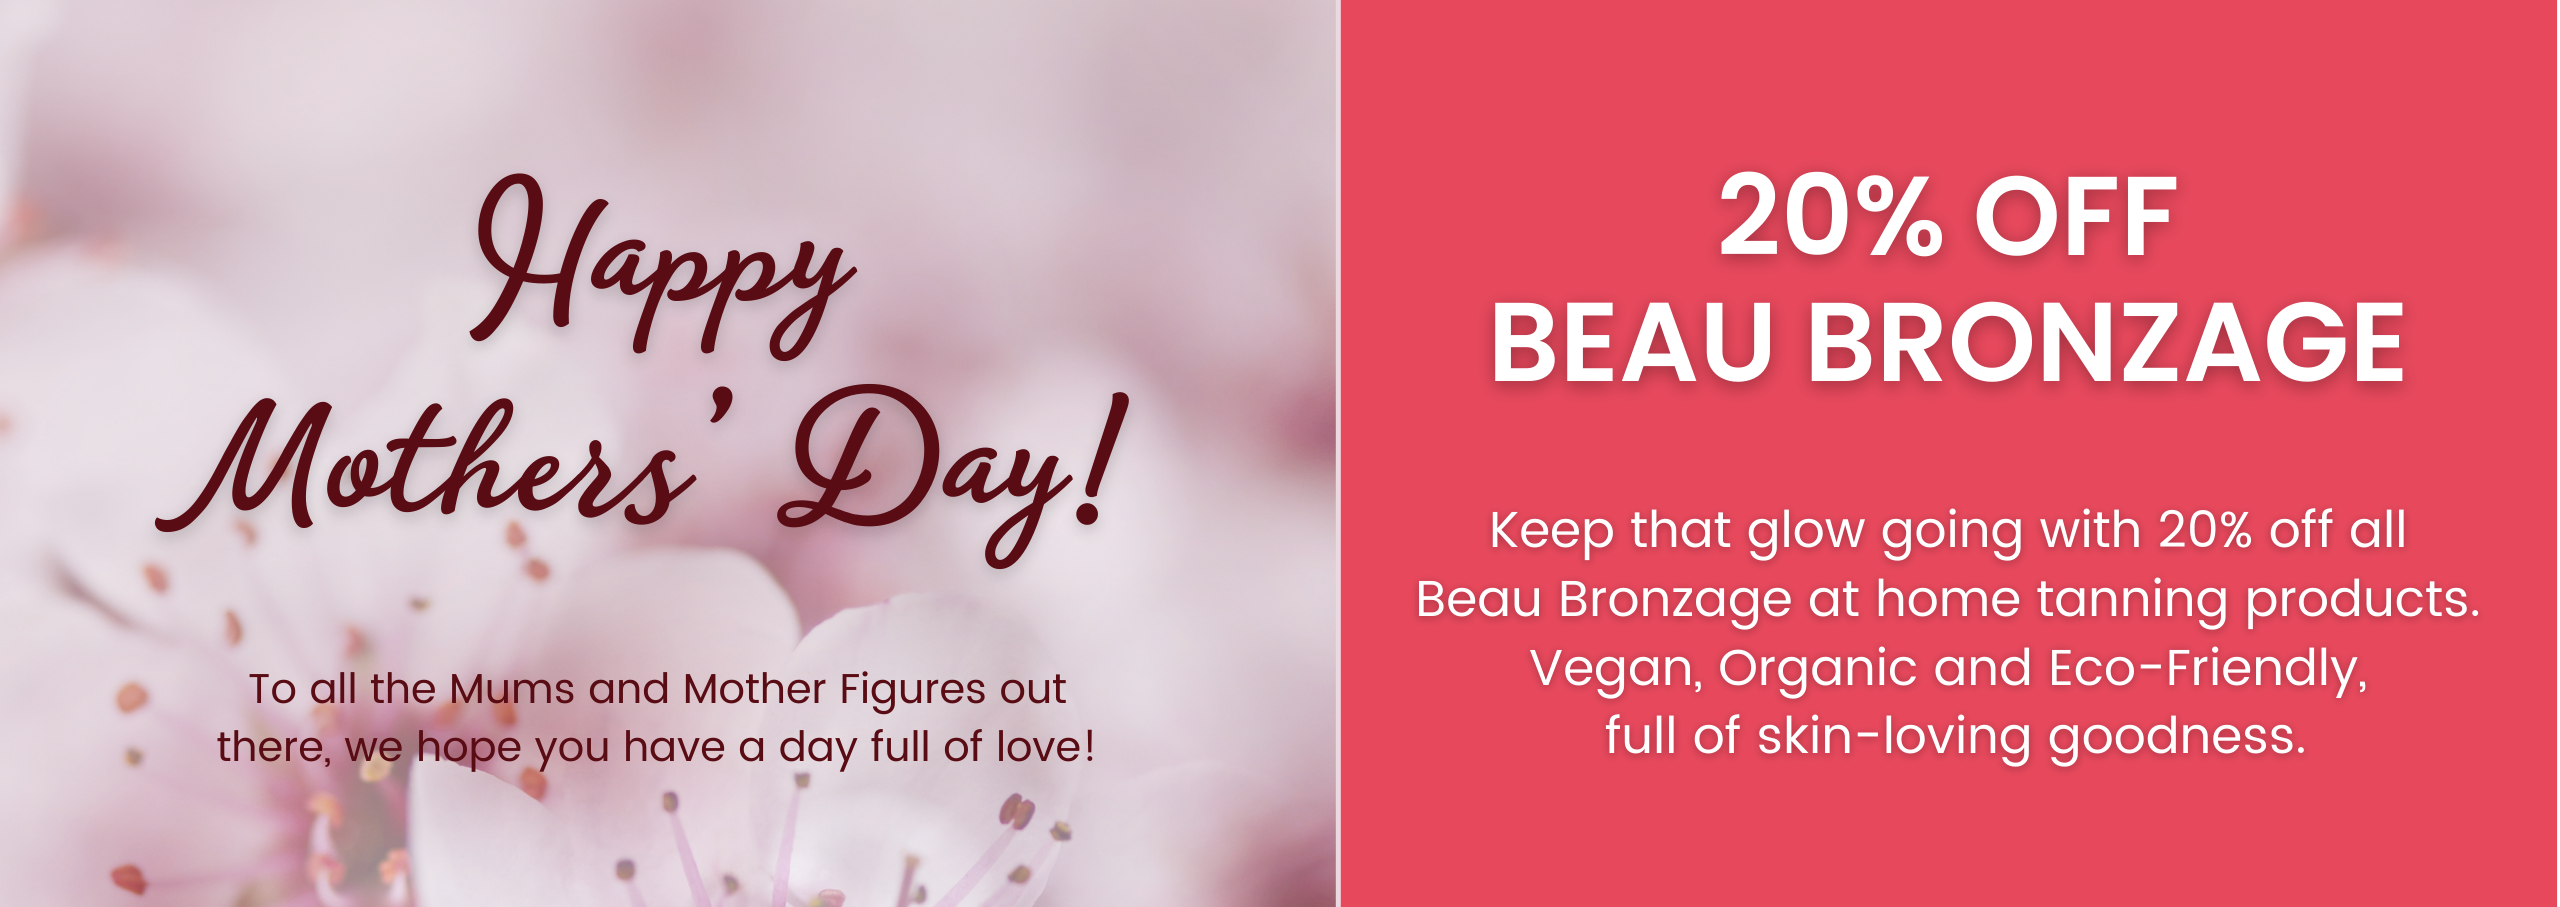 Keep that glow going with 20 percent off Beau Bronzage products